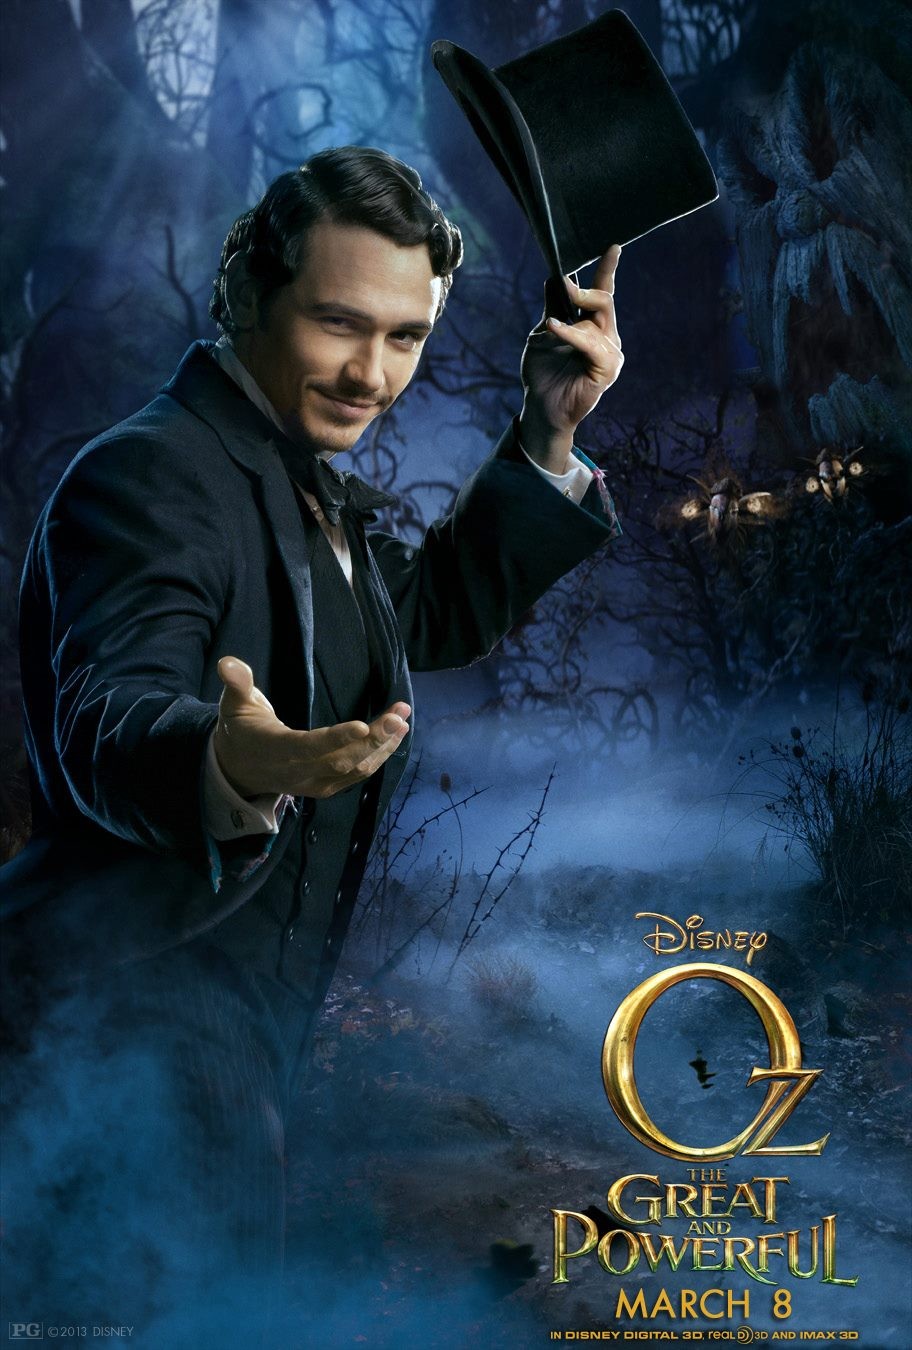 Extra Large Movie Poster Image for Oz: The Great and Powerful (#9 of 16)